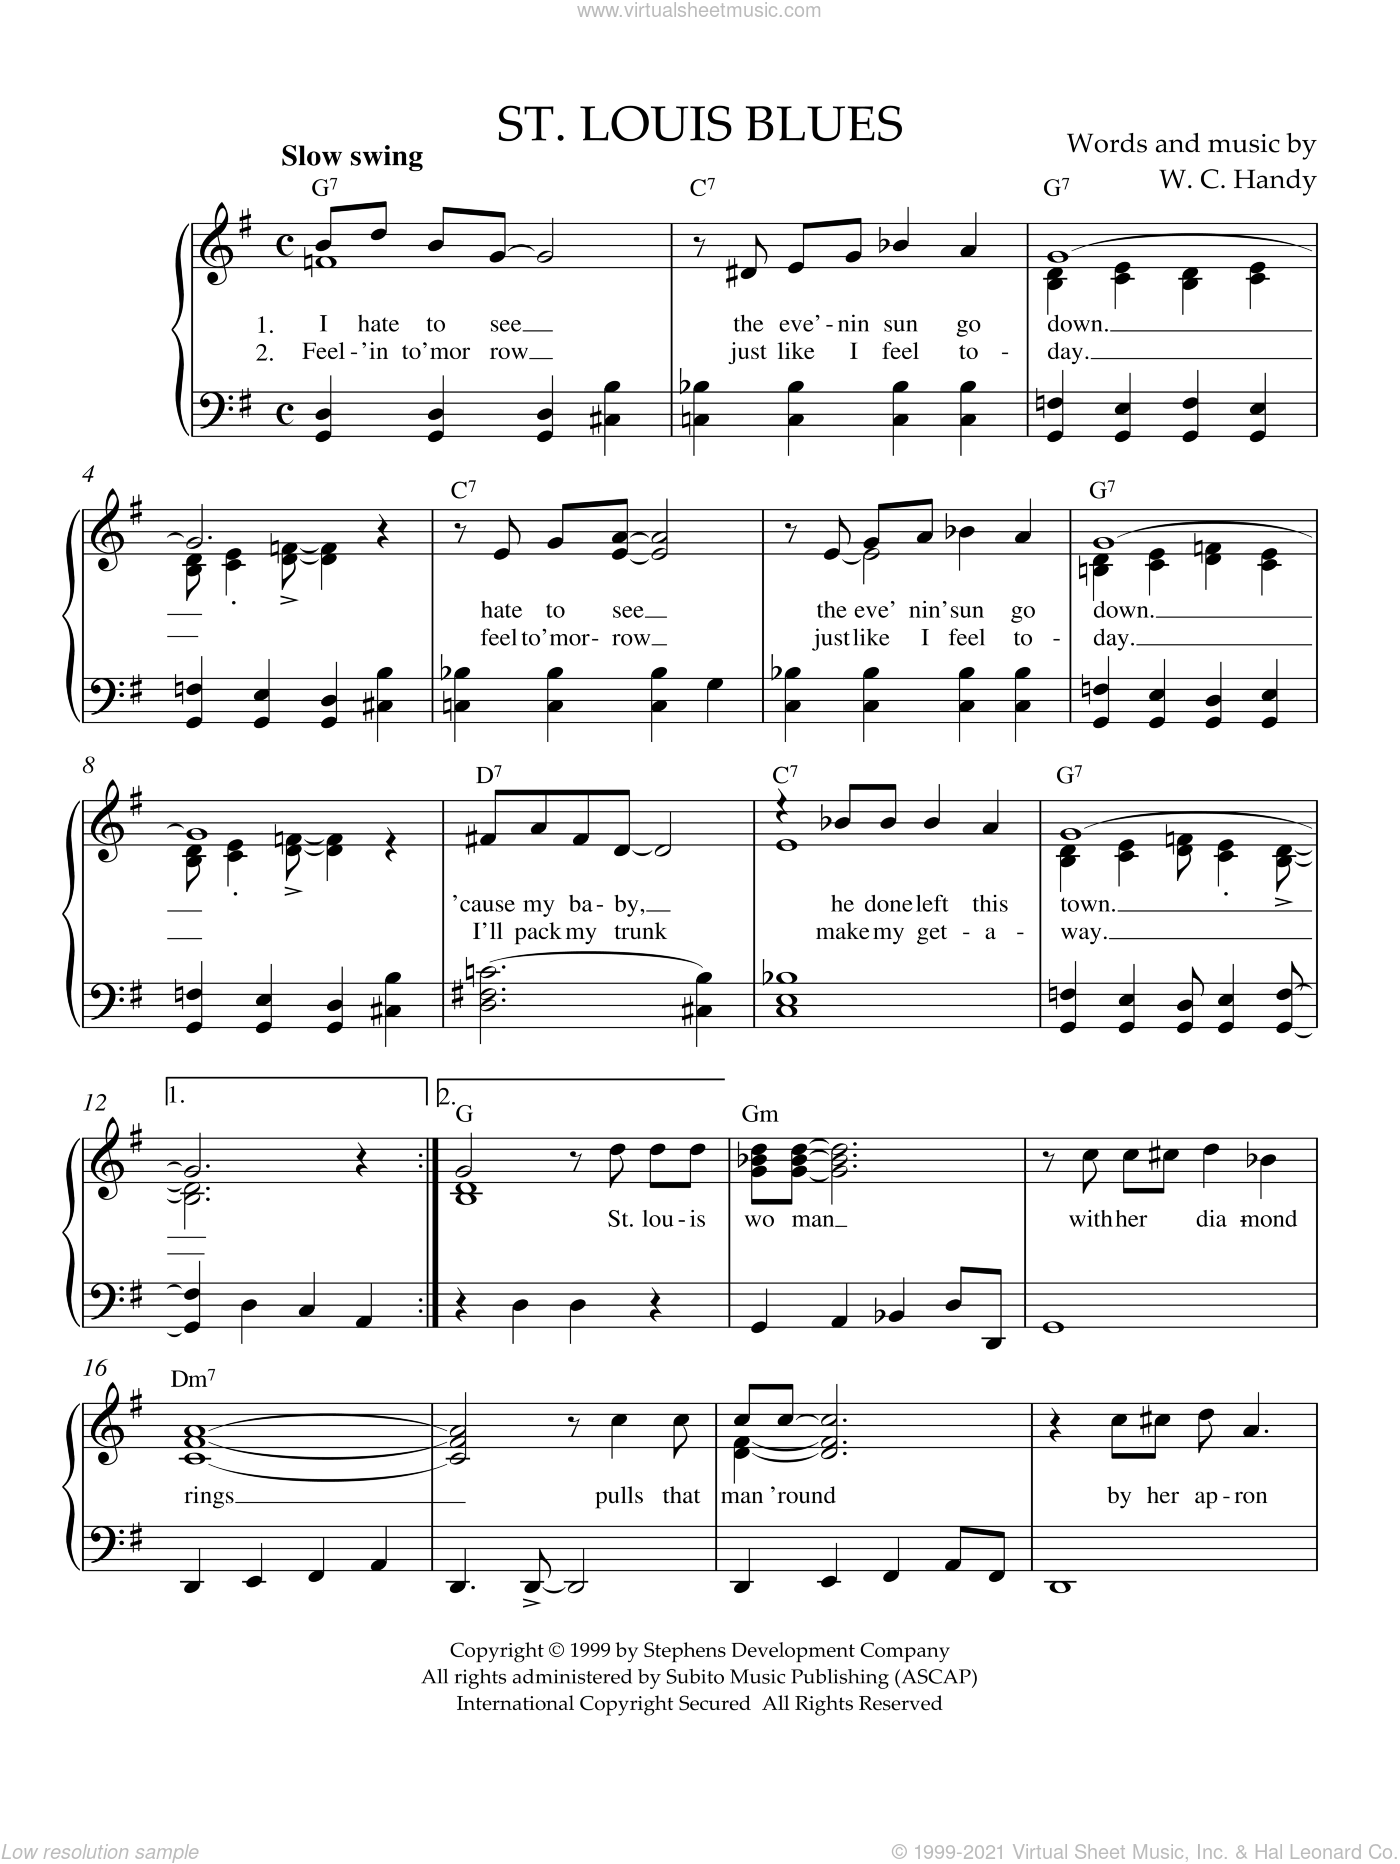 Handy - St. Louis Blues sheet music for piano solo